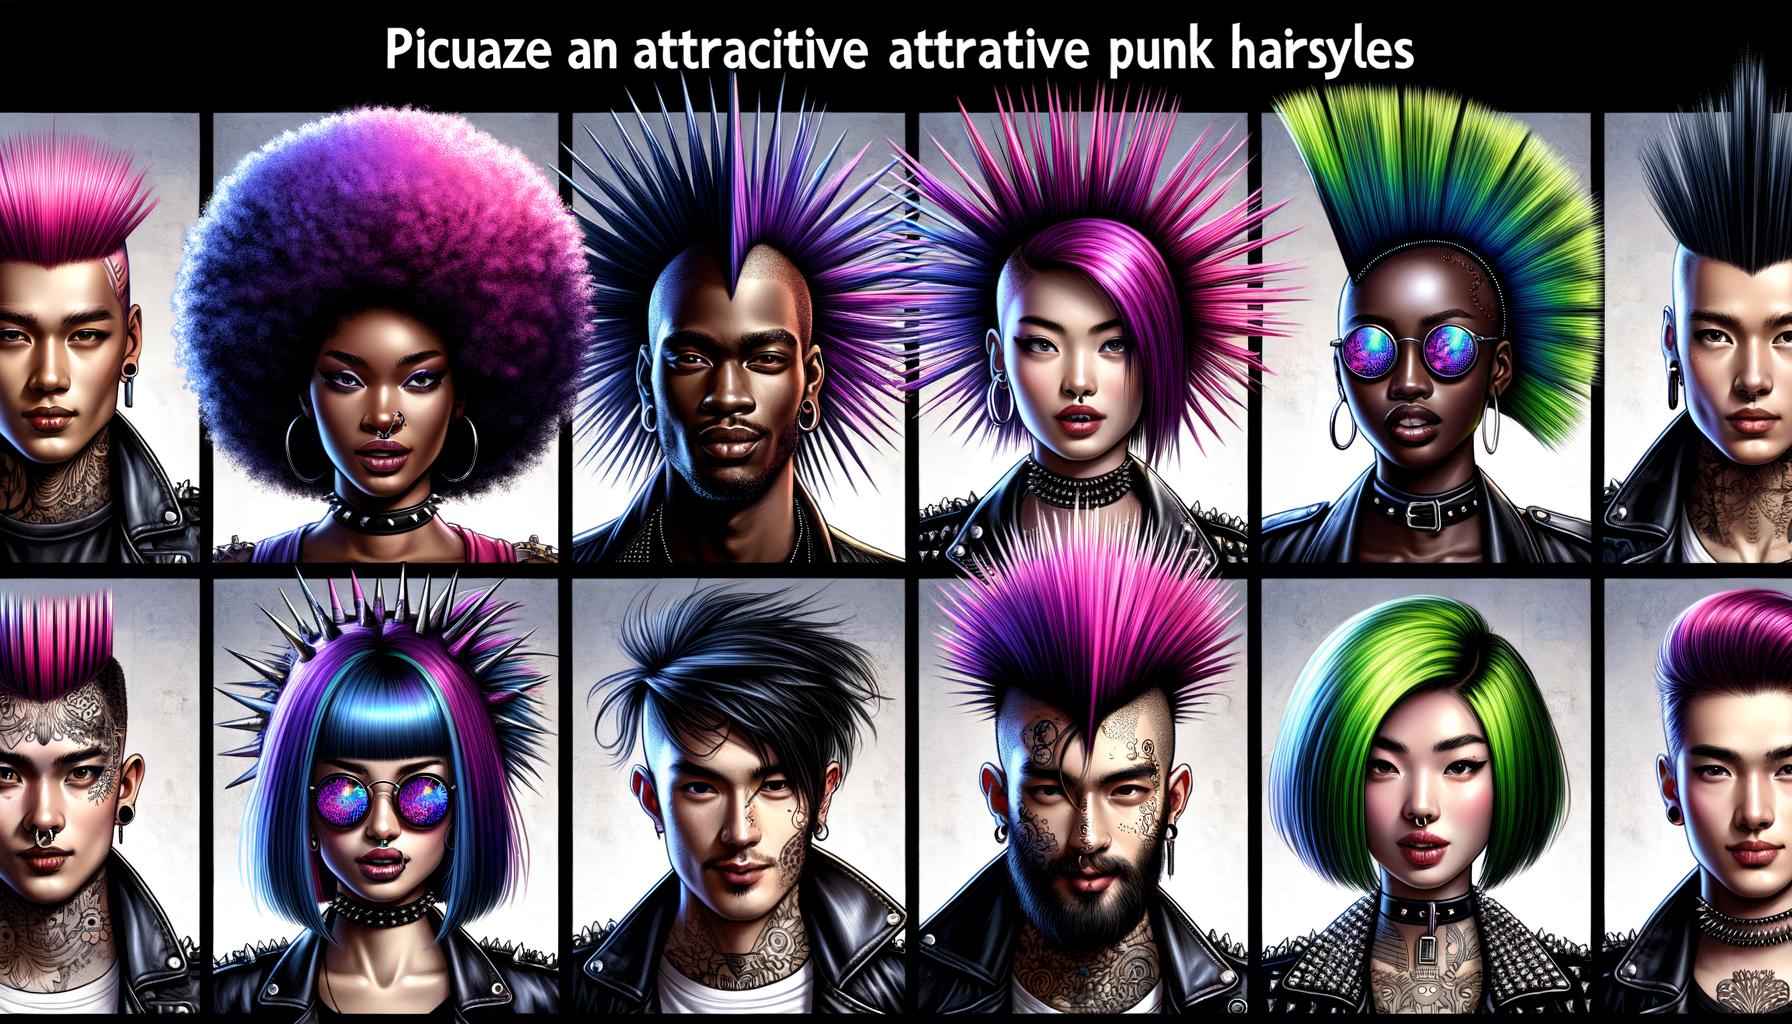 Edgy short punk hairstyles: Rock your fantasy